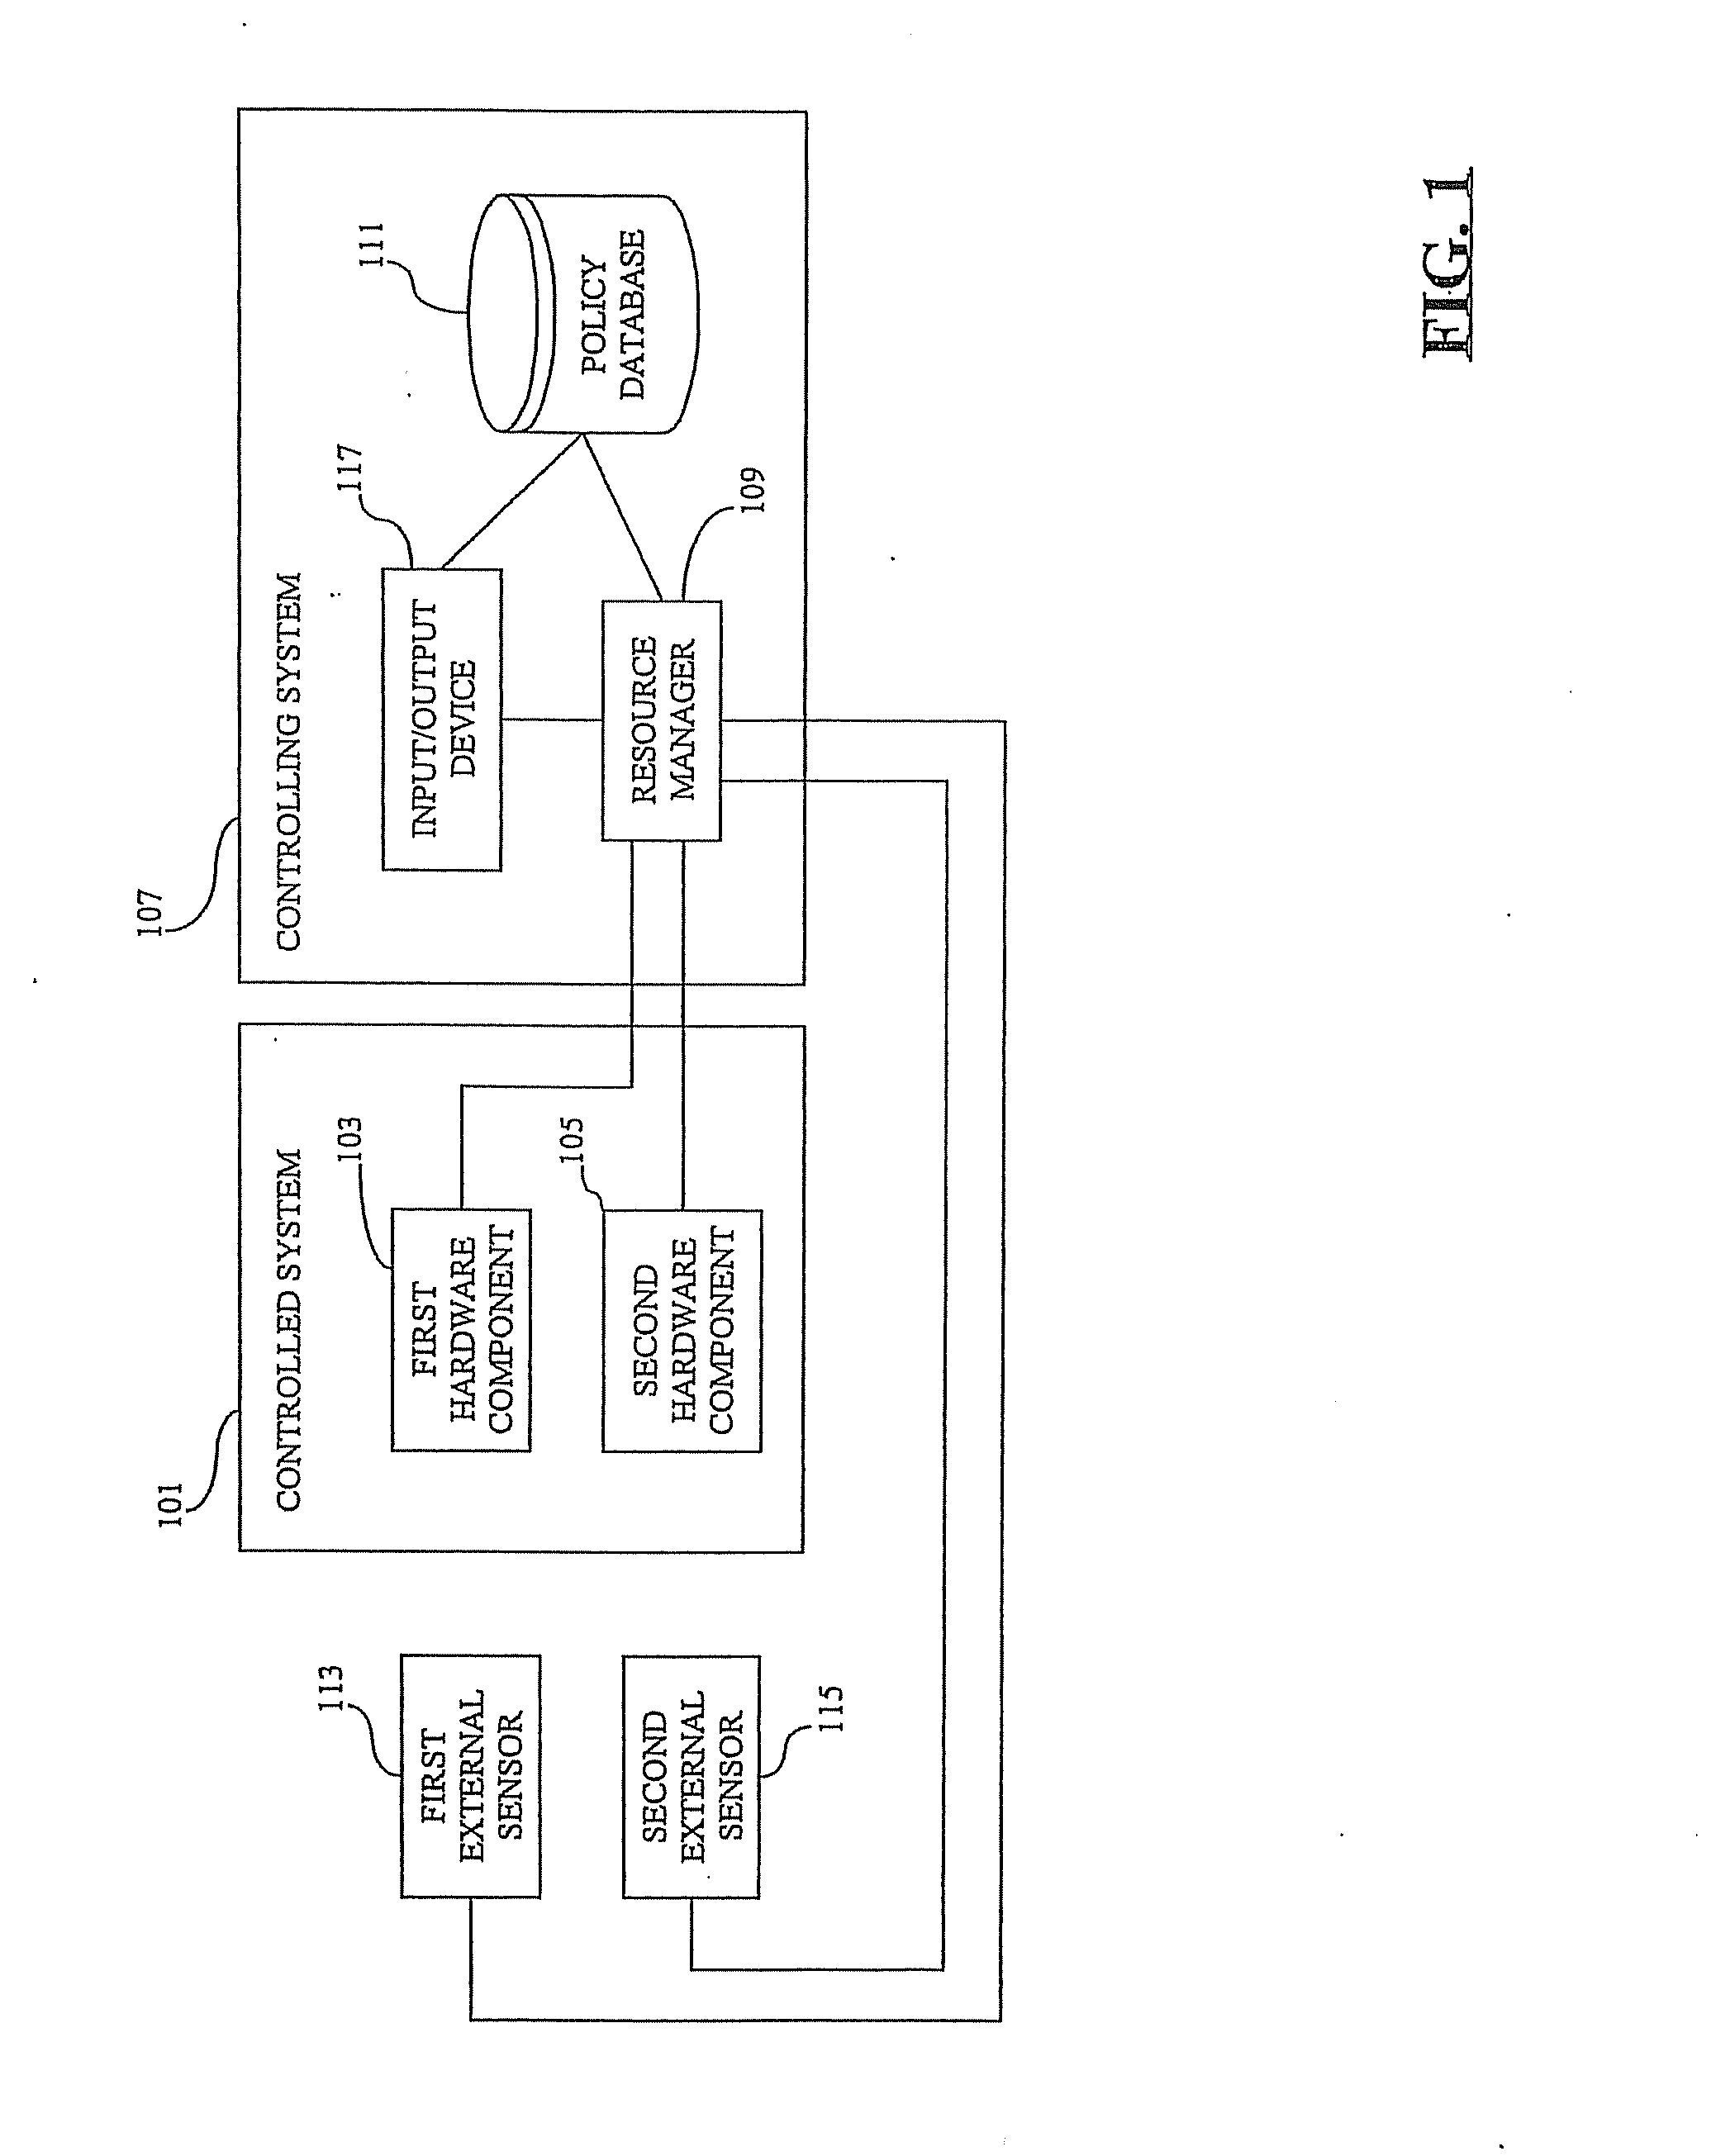 Computer system management and throughput maximization in the presence of power constraints